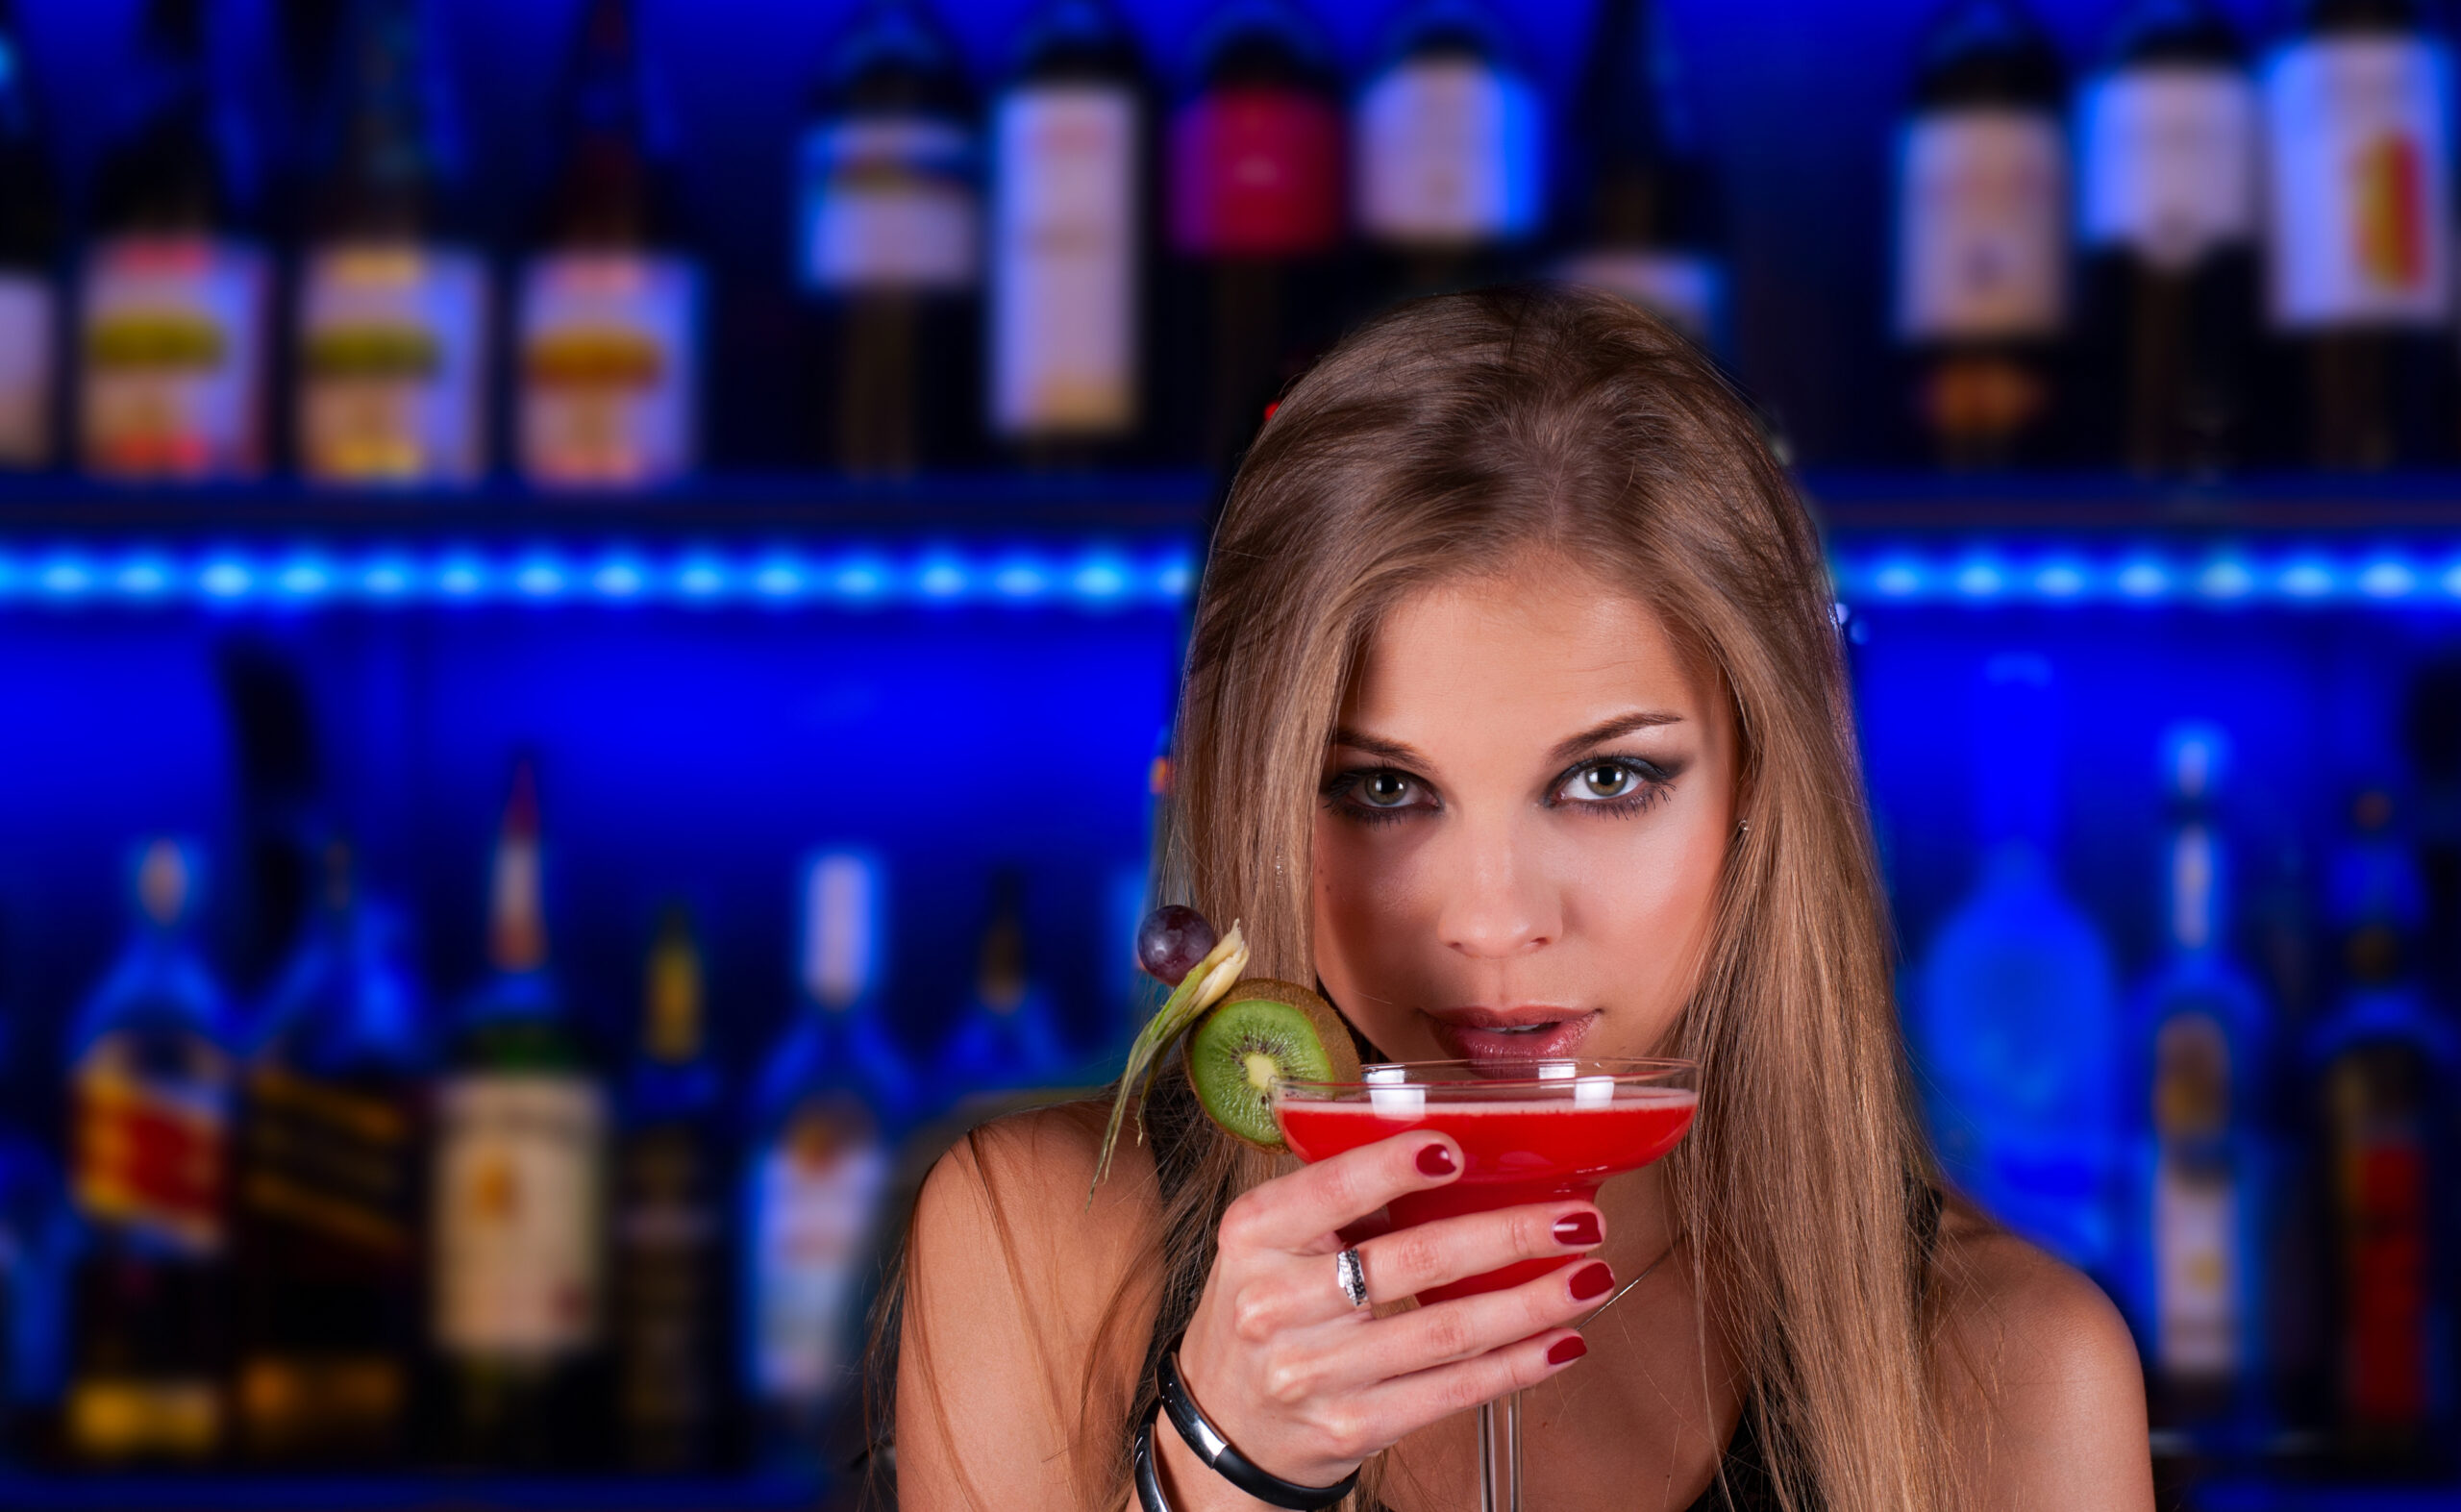 A woman is holding a cocktail in front of a bar.